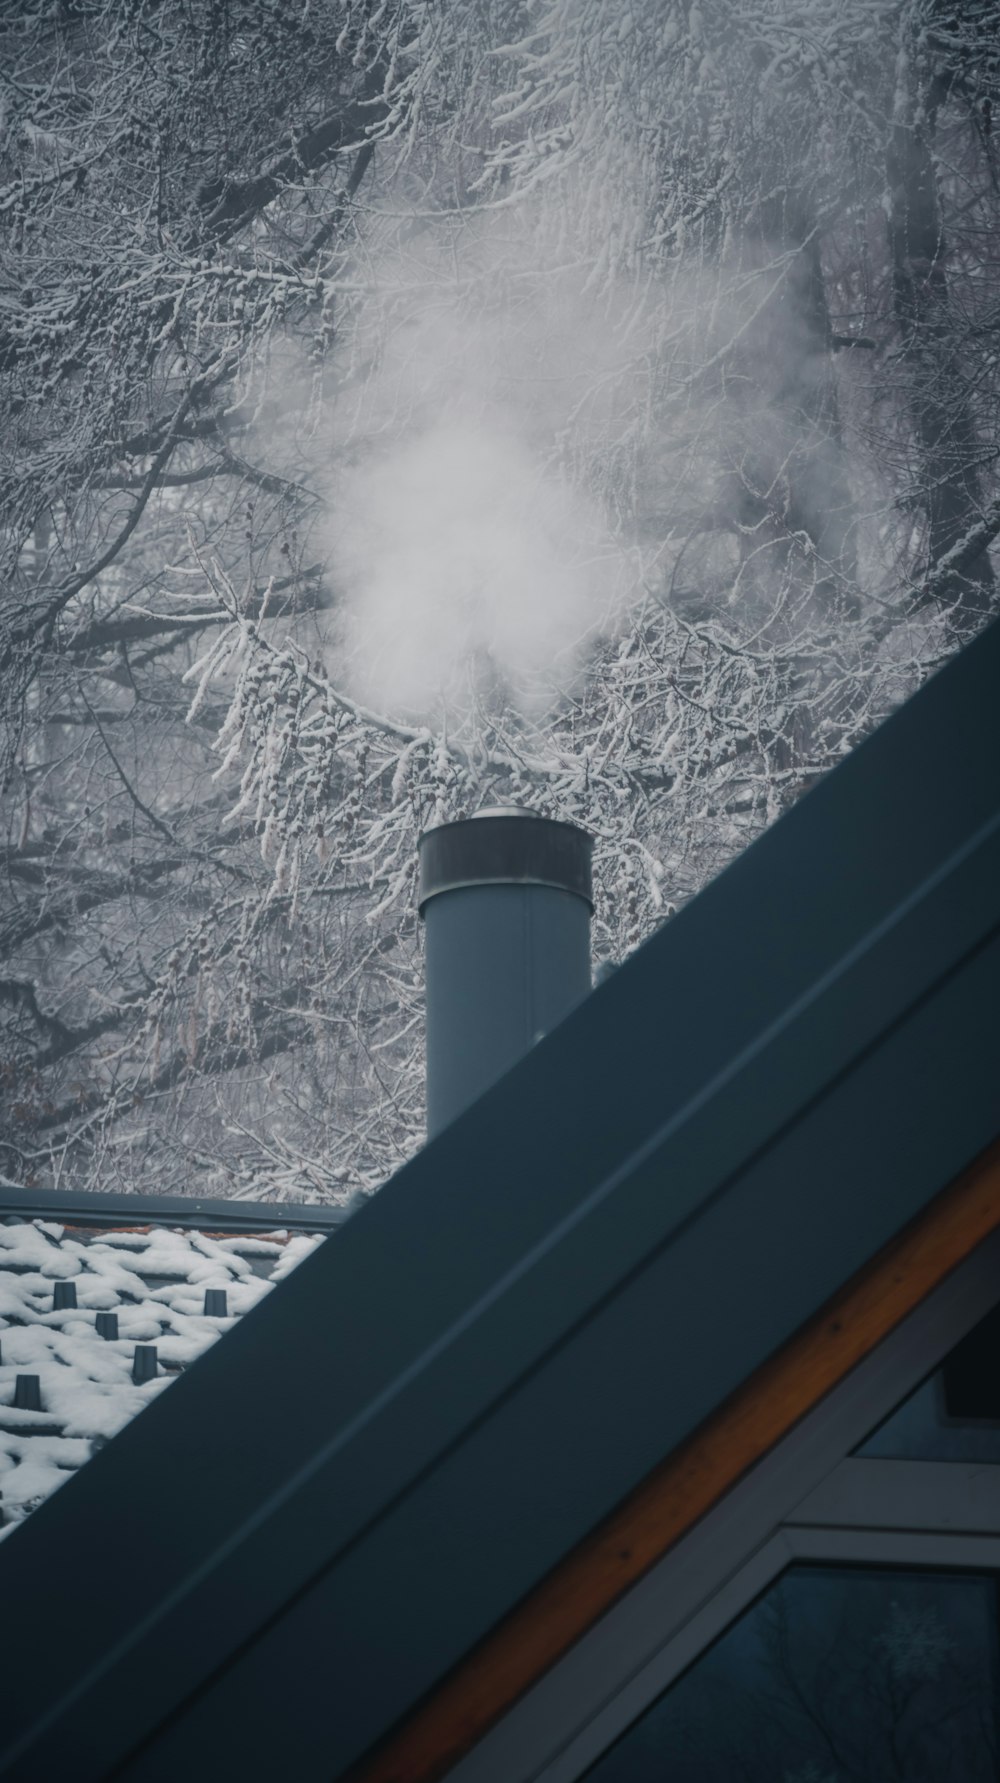 smoke coming out of a chimney on a snowy day